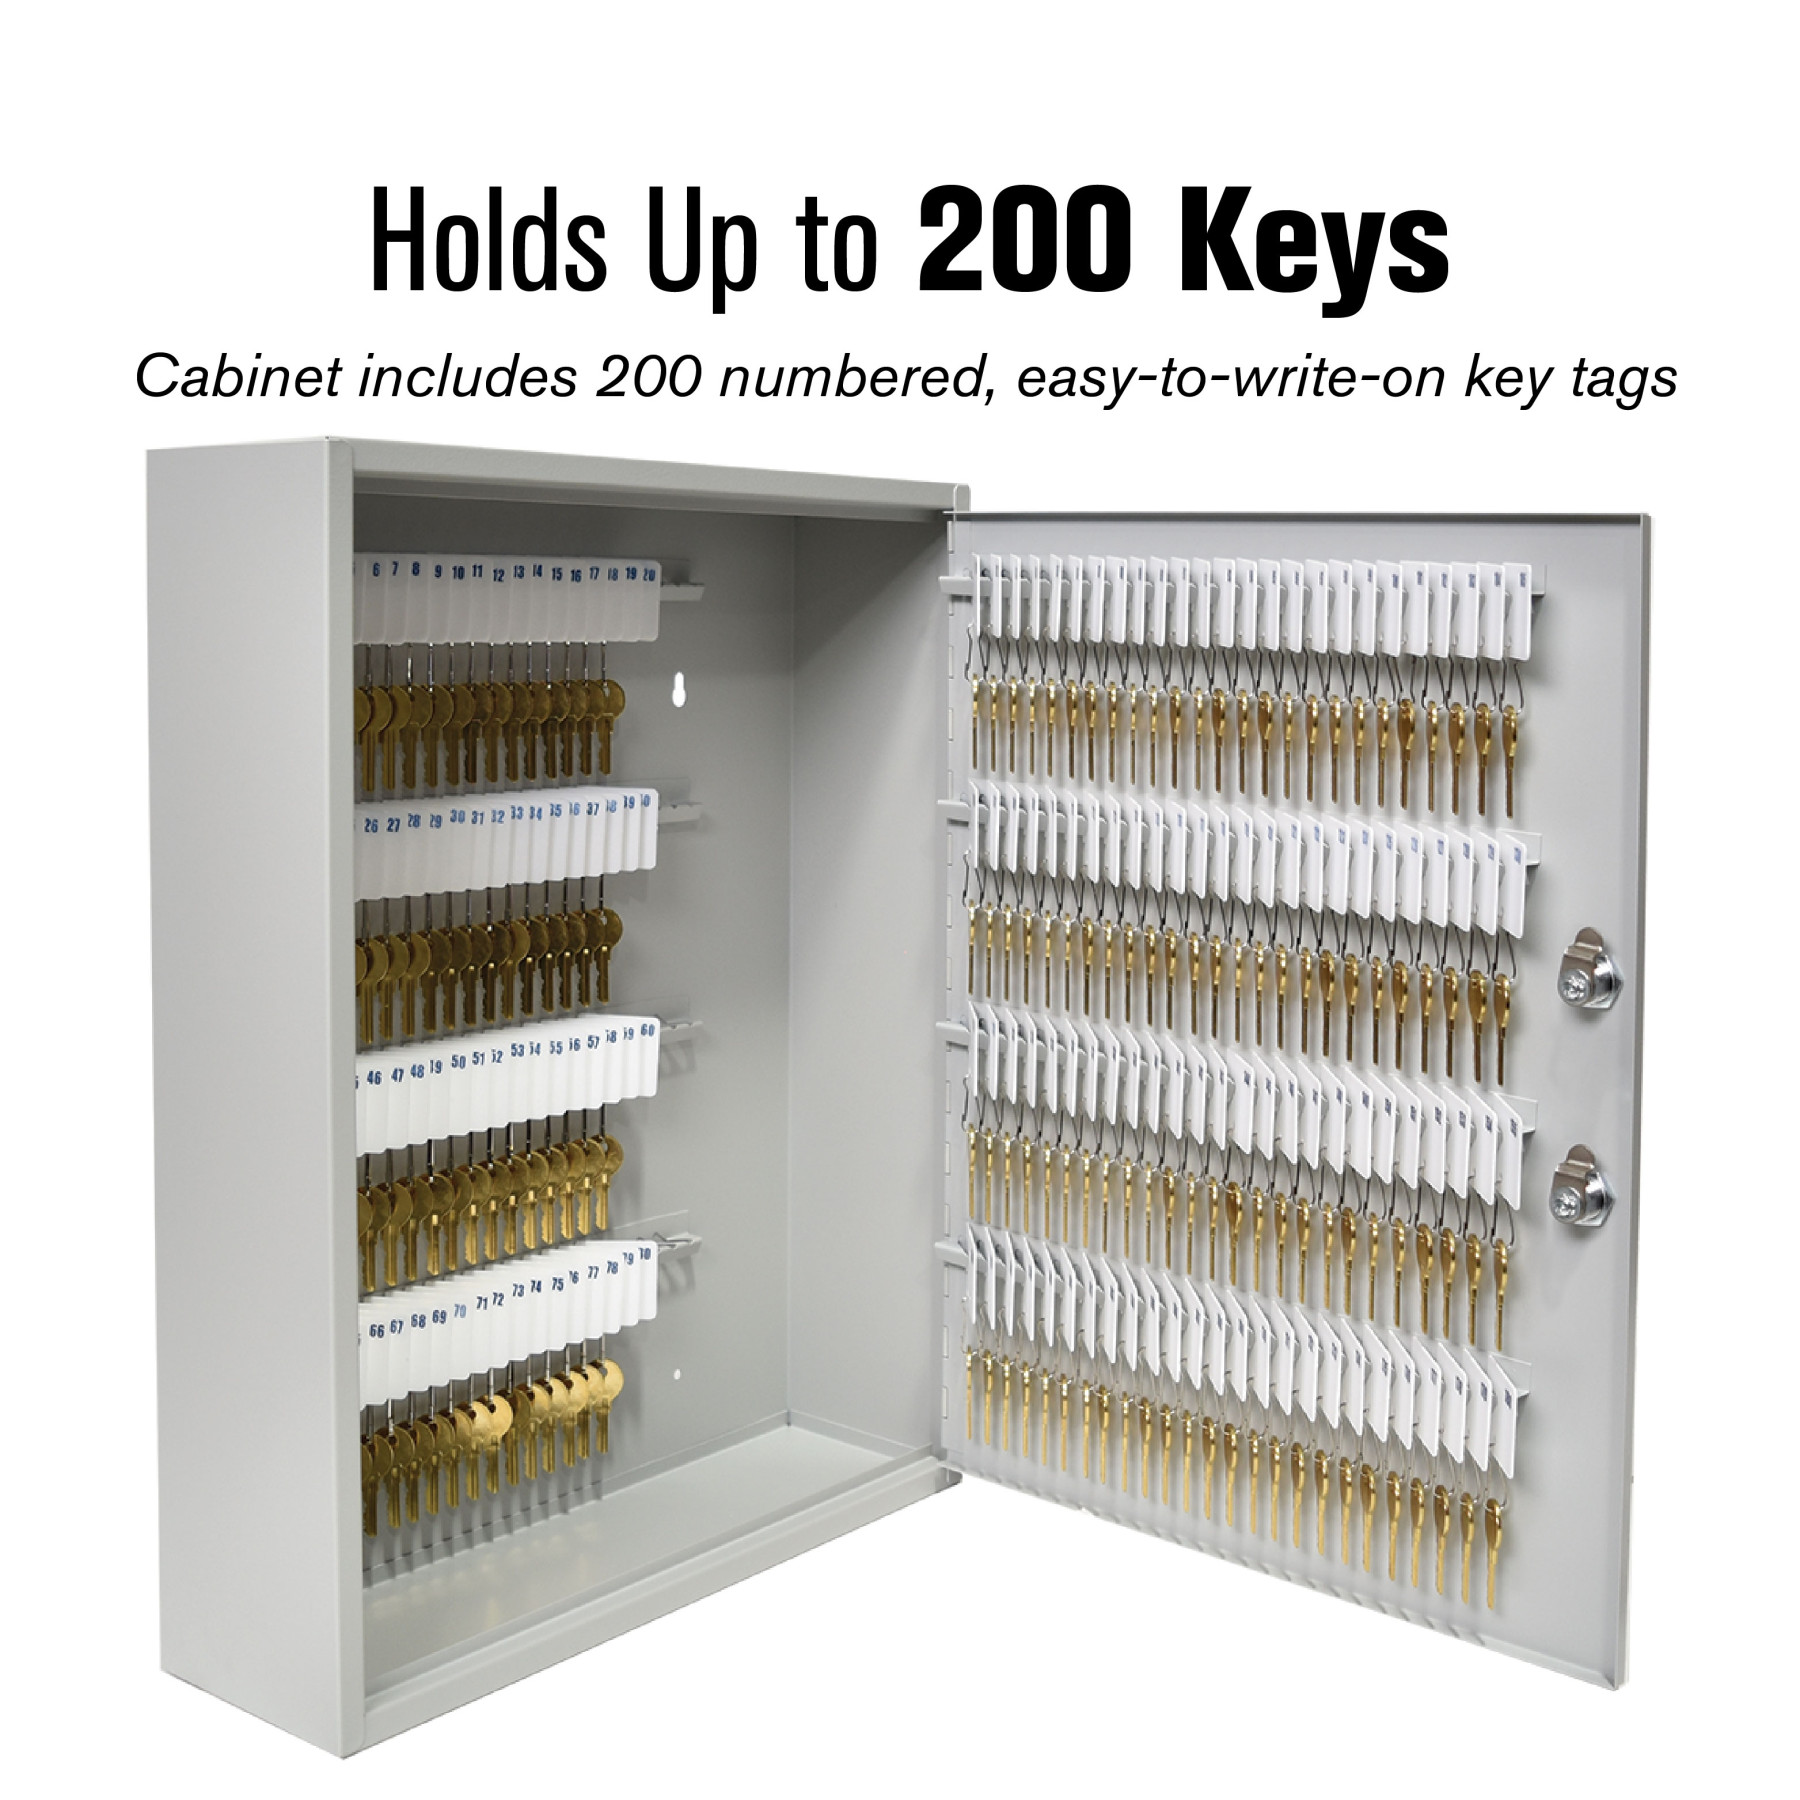 Dual Lock Fort Knox™ Key Cabinet - 200 Key Capacity - Keyed Differently - holds up to 200 keys